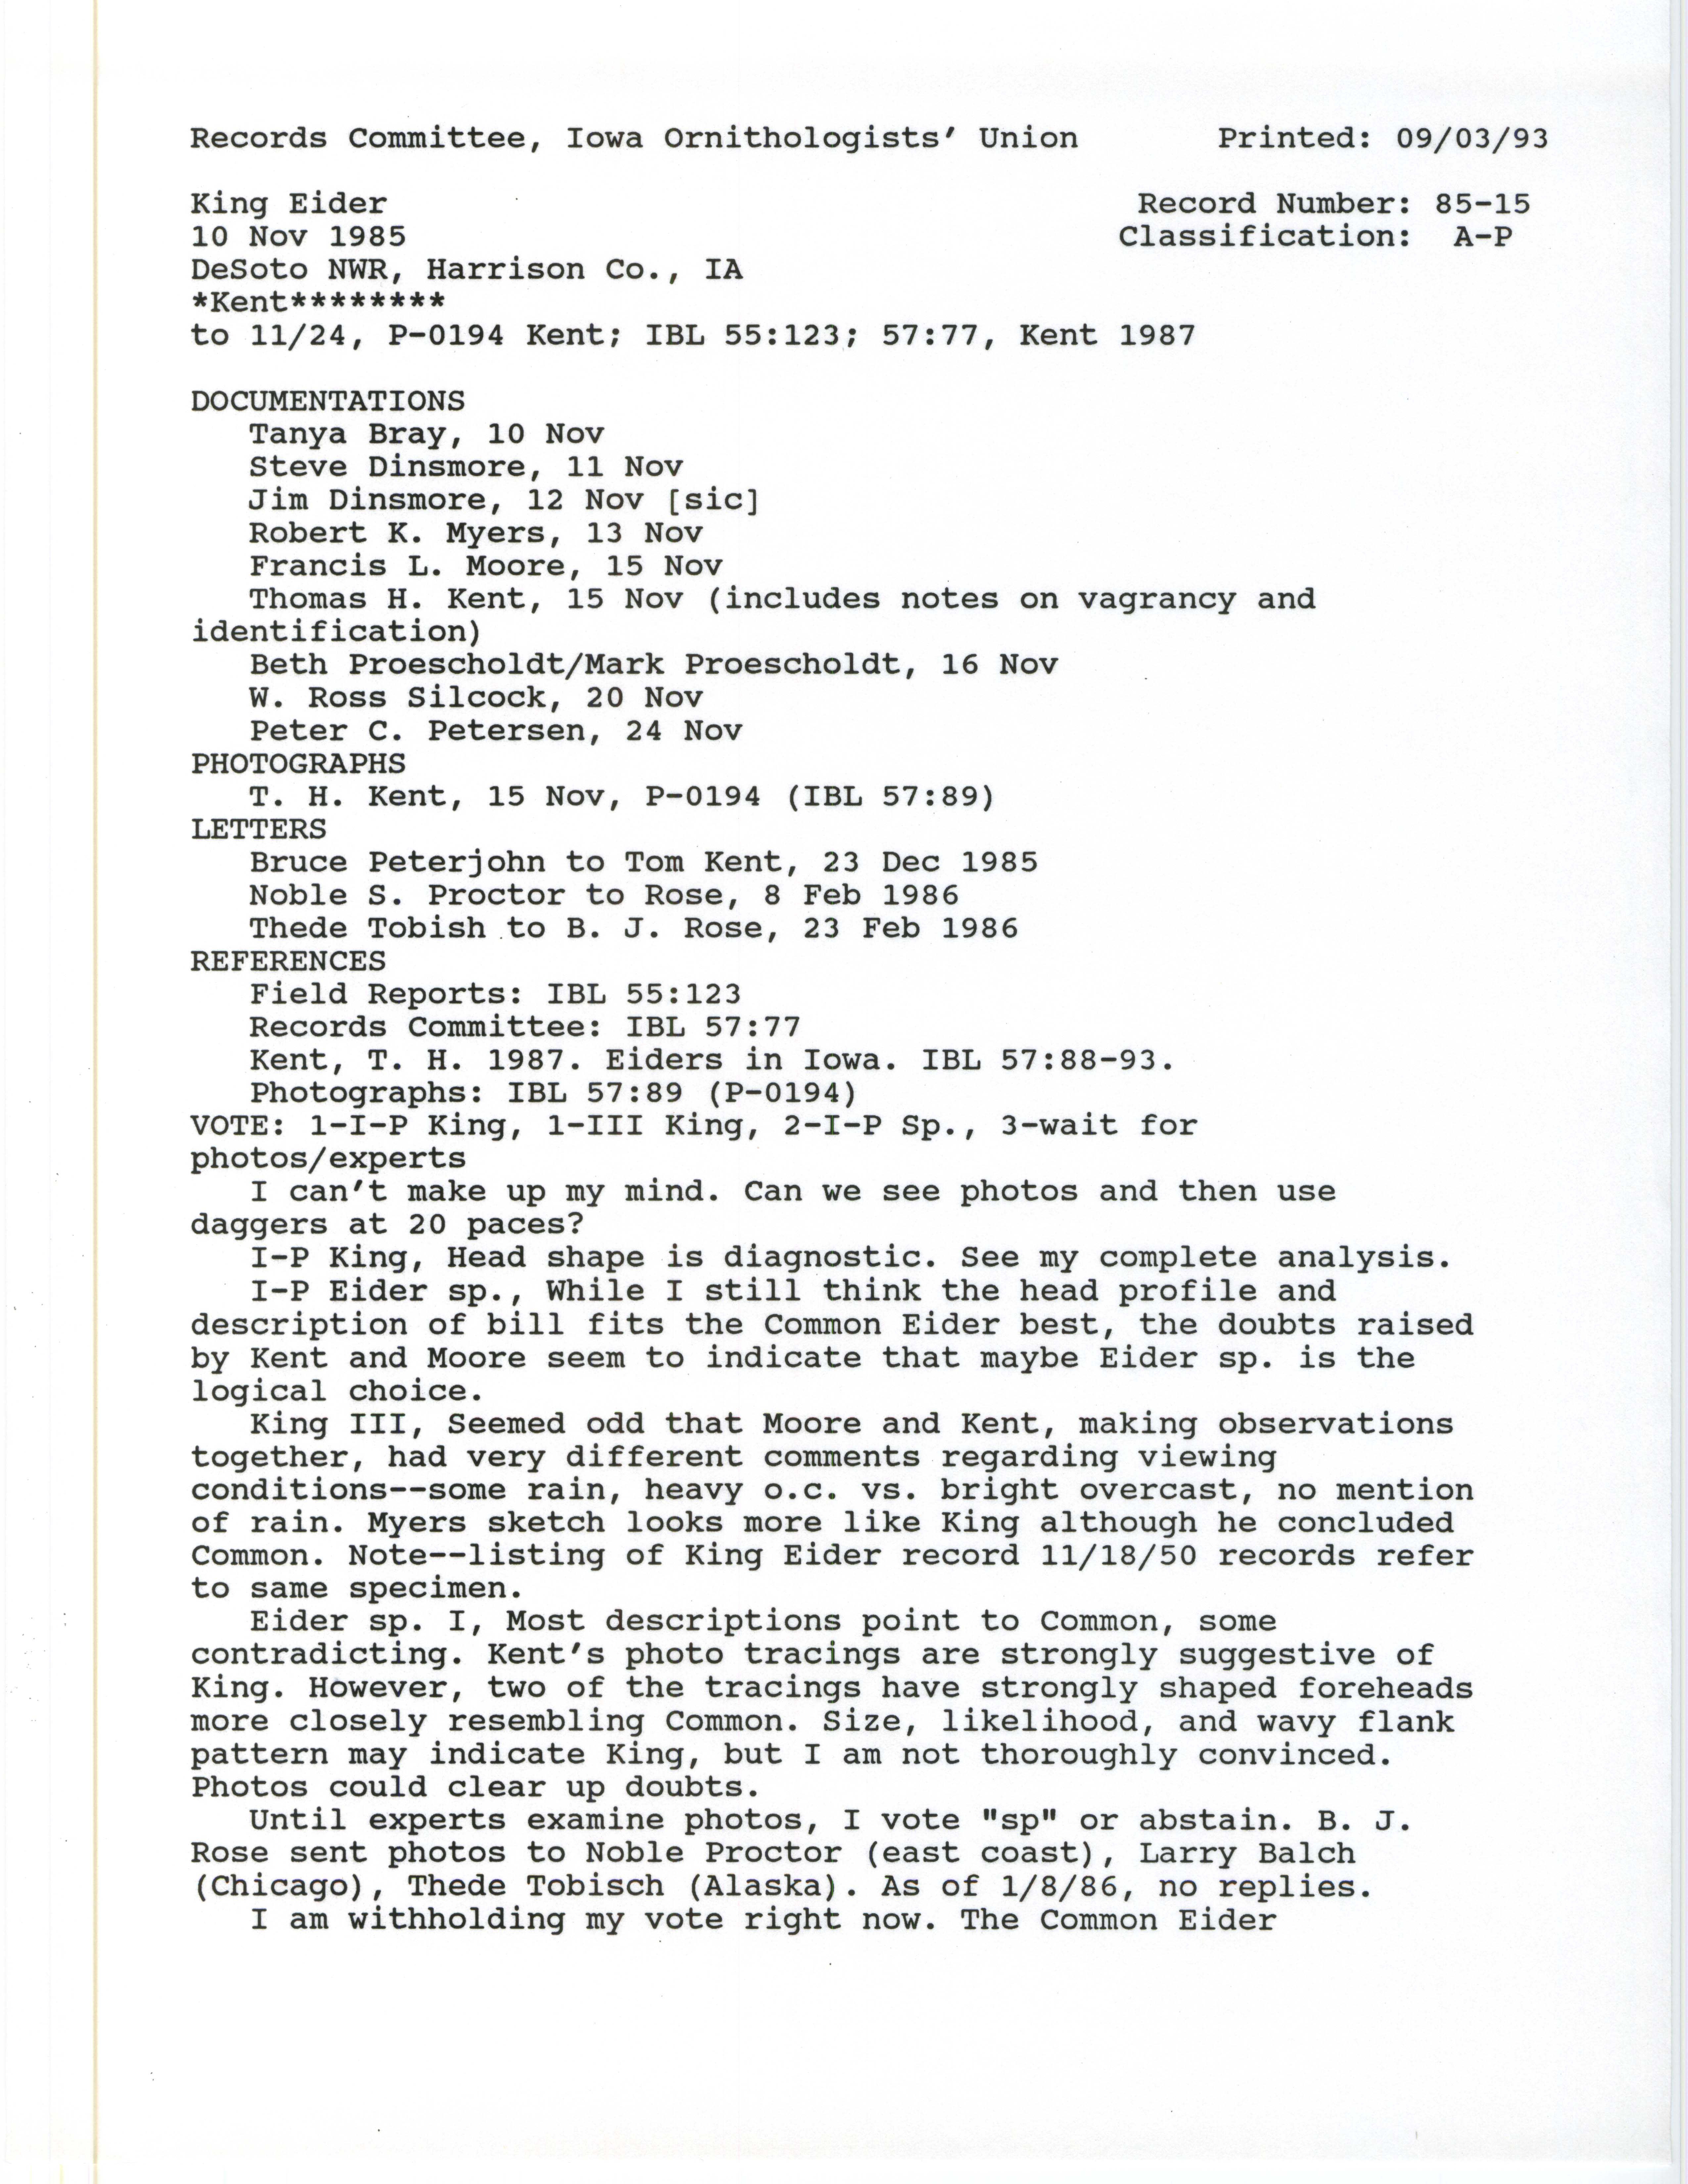 Records Committee review for rare bird sighting of King Eider at De Soto National Wildlife Refuge, 1985